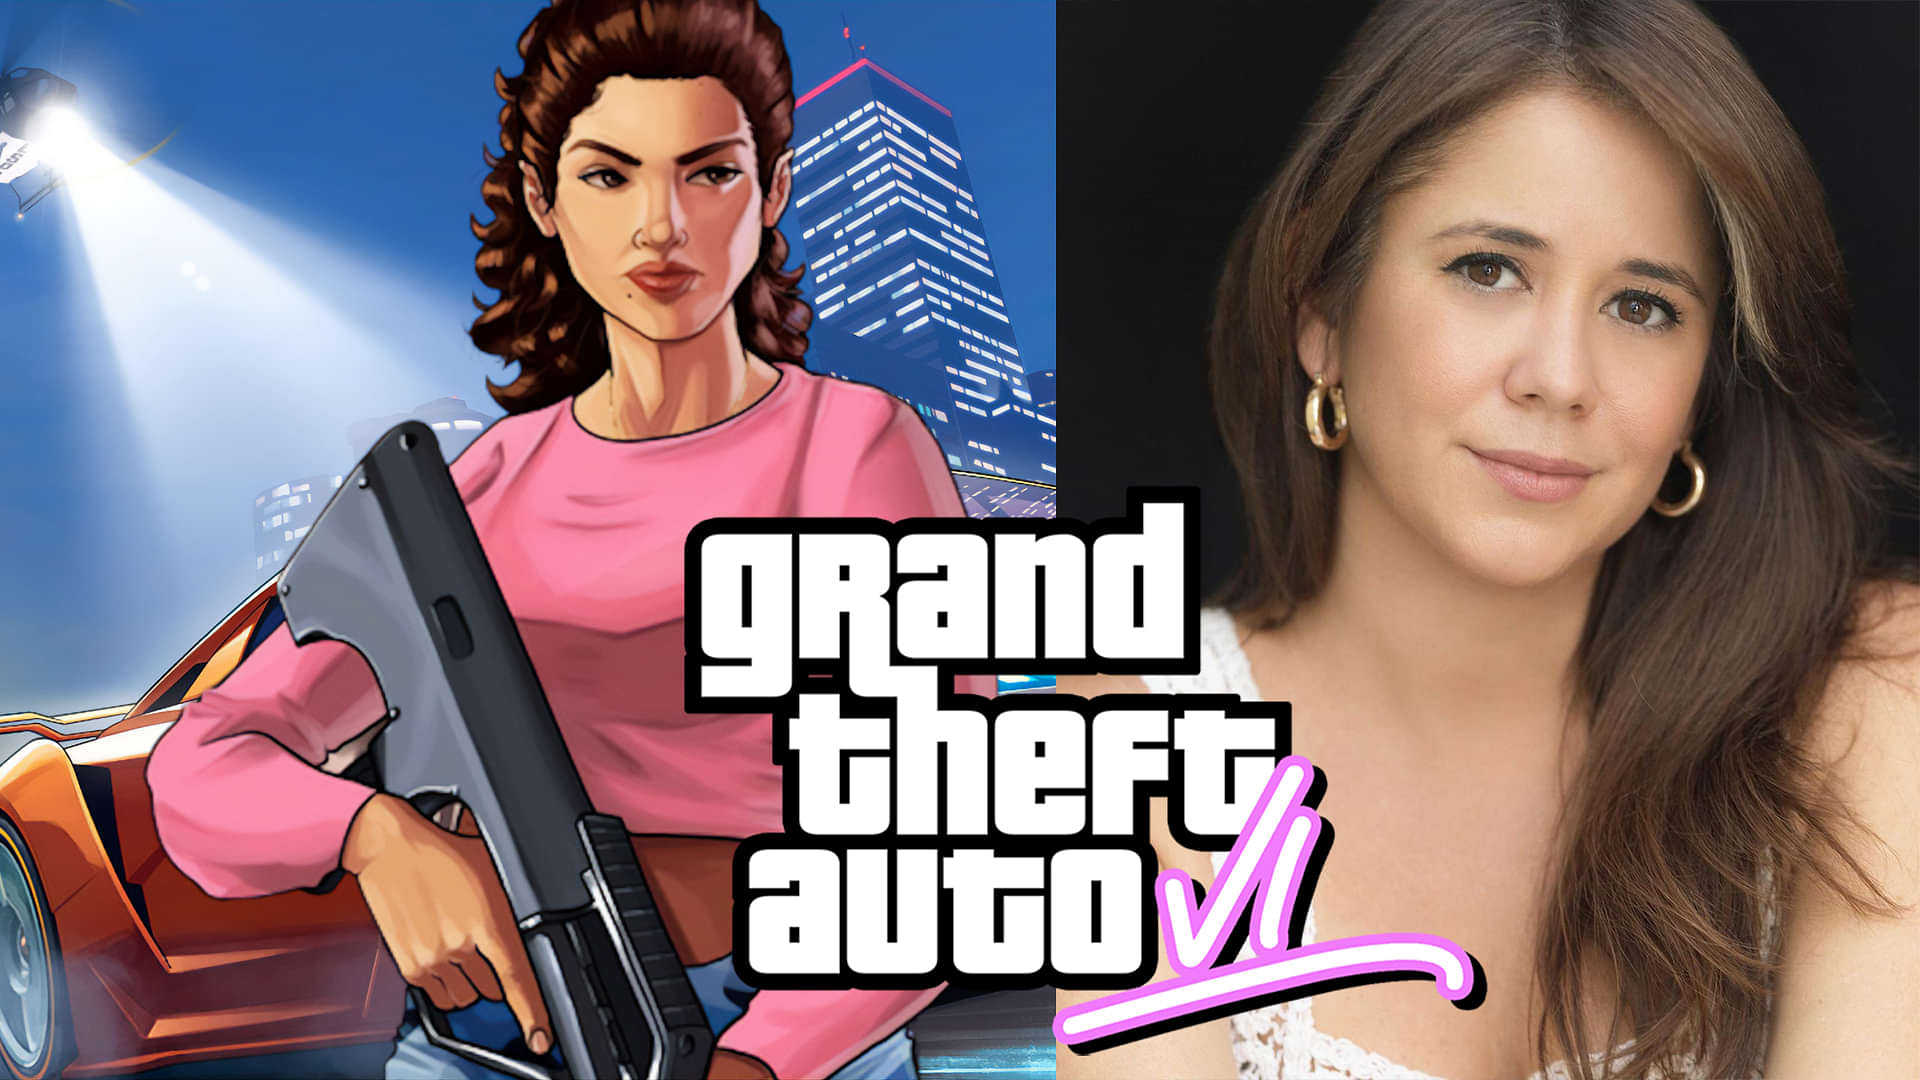 In 24 hours, what do you think the view count will be ? : r/GTA6